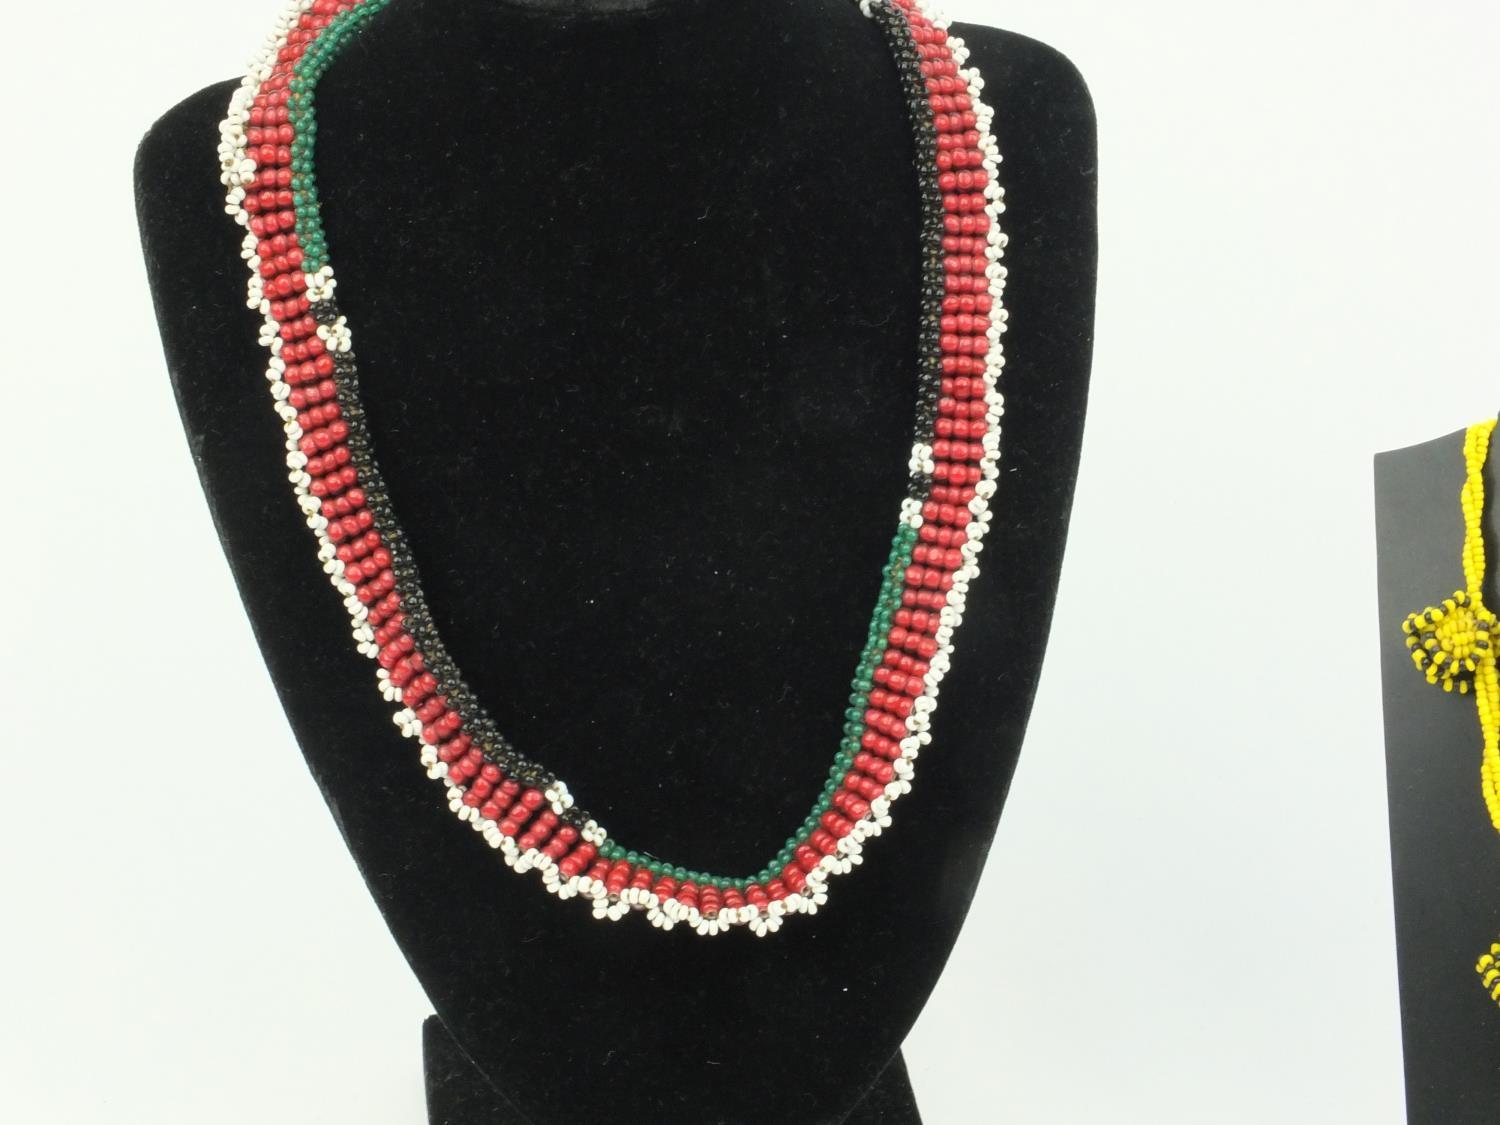 Four tribal beadwork necklaces, the largest 27cm long - Image 2 of 6